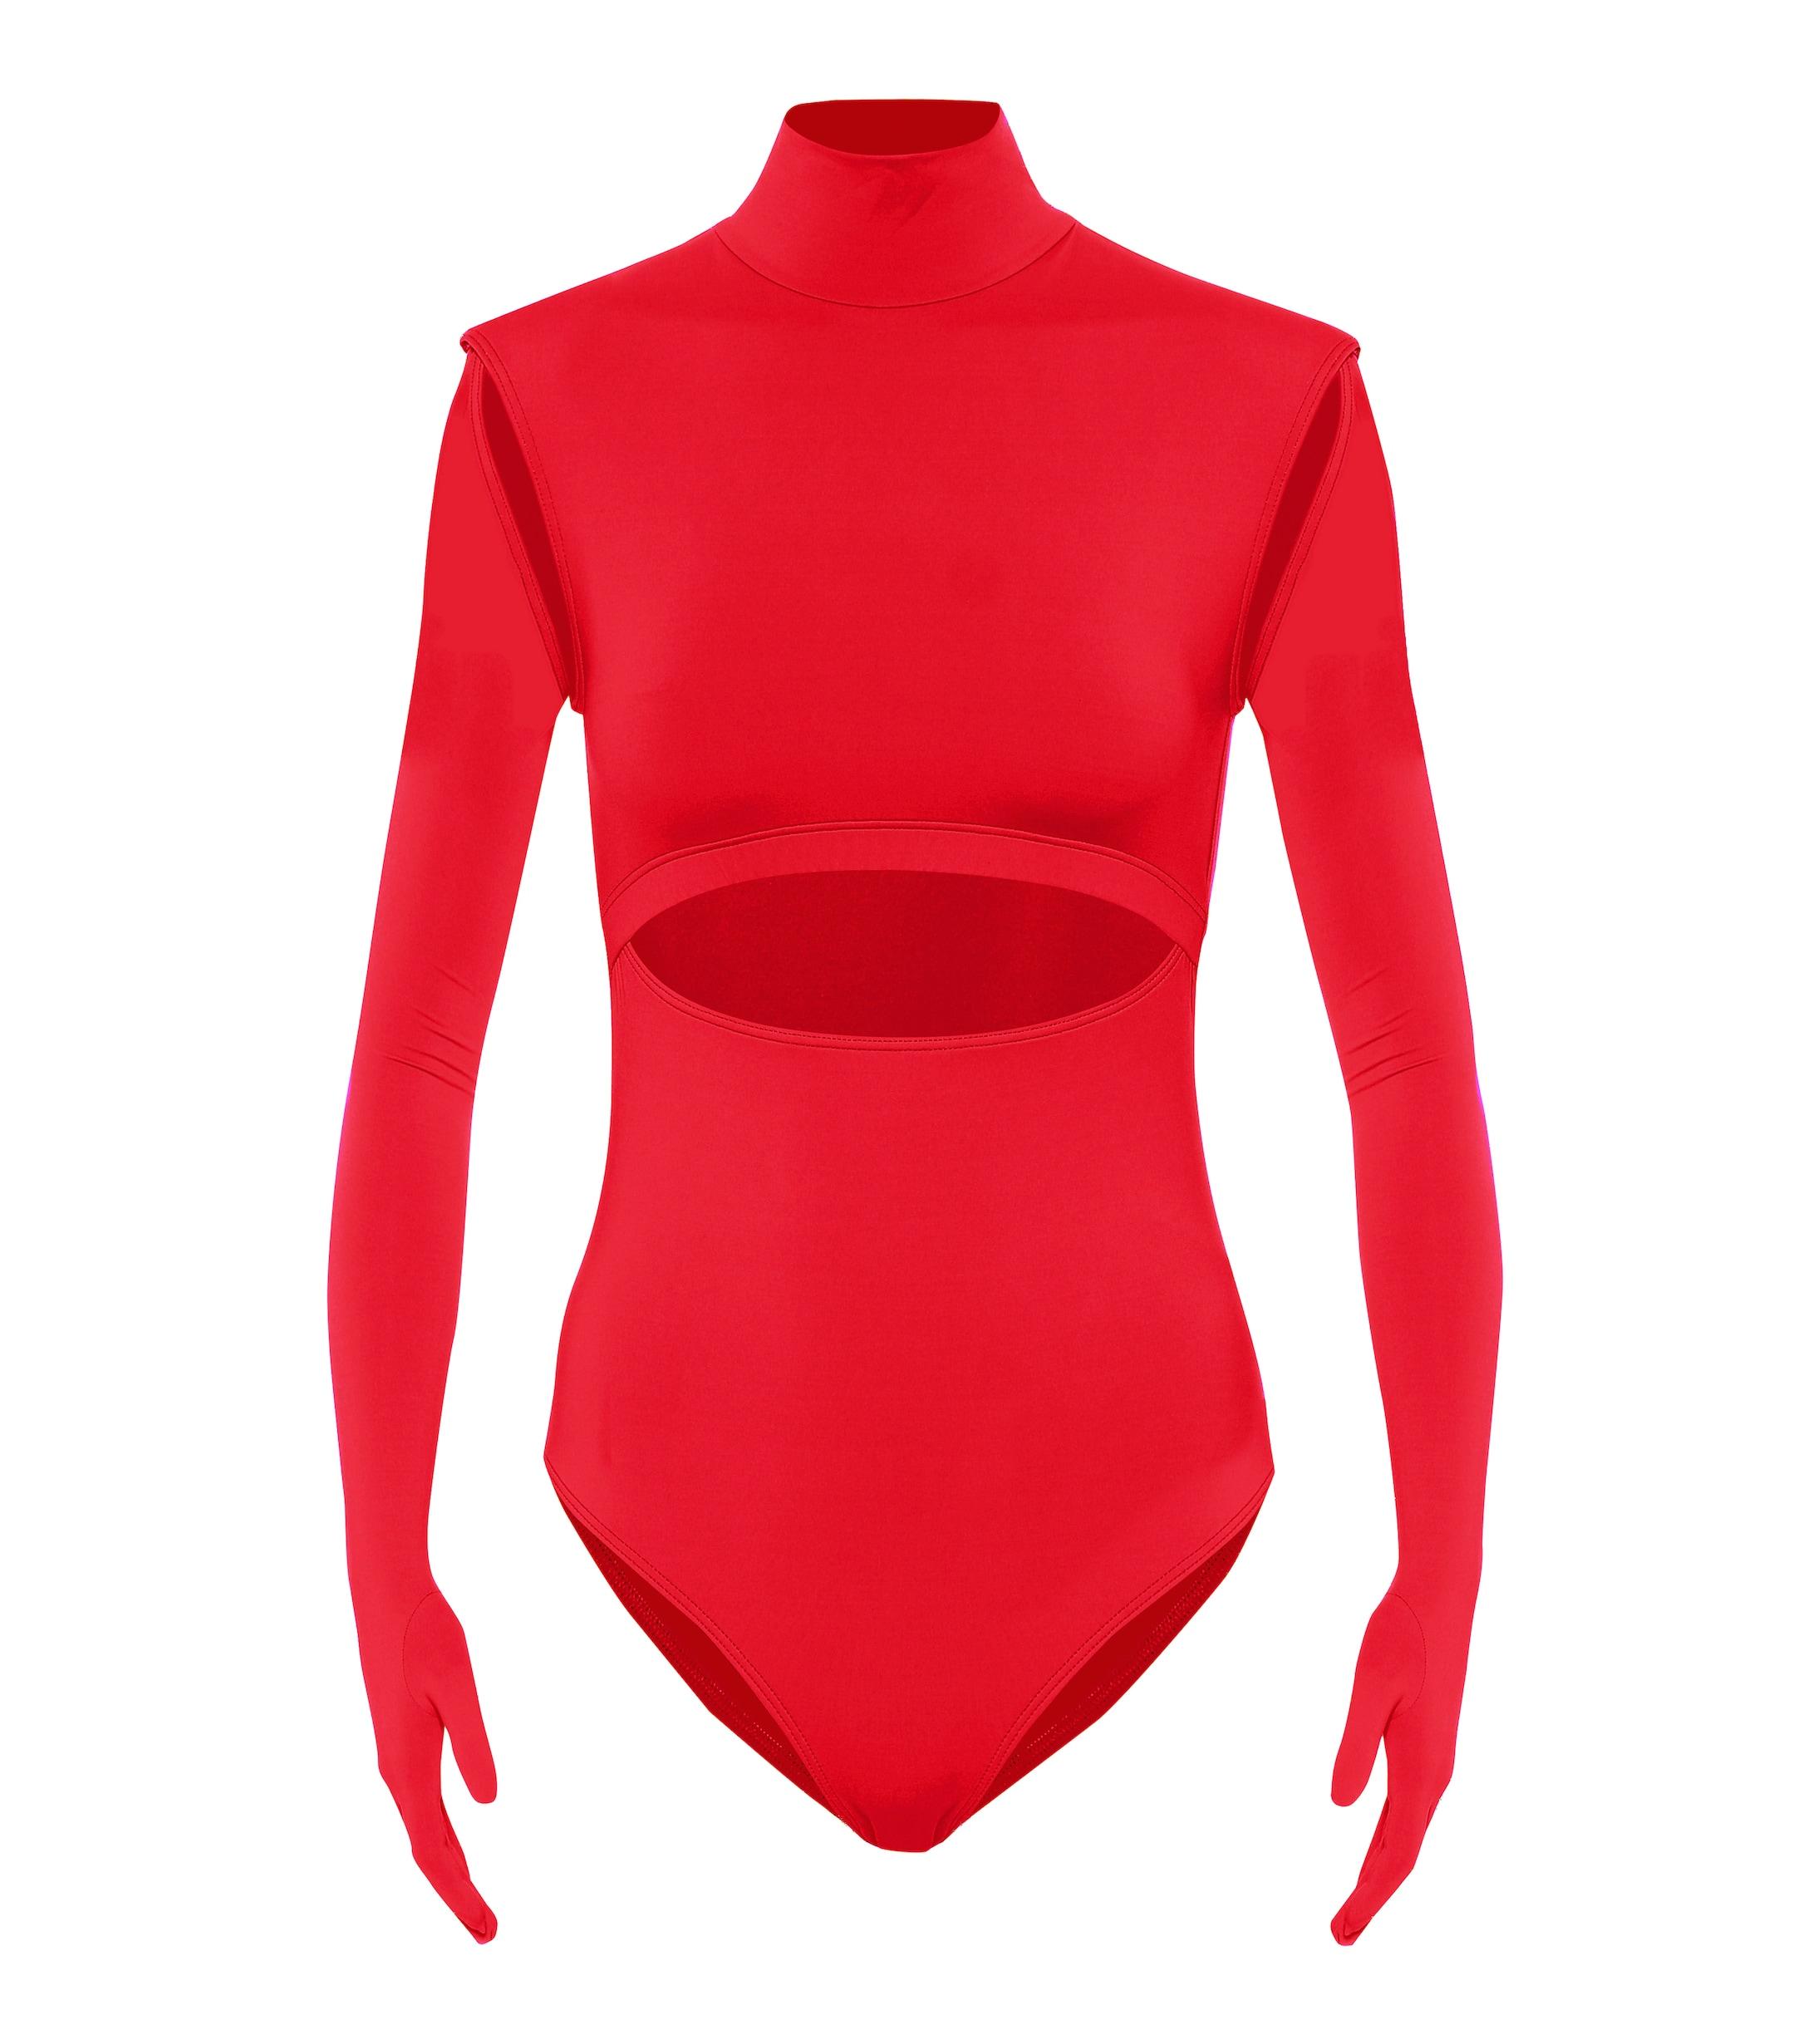 Vetements Bodysuit With Gloves in Red - Lyst